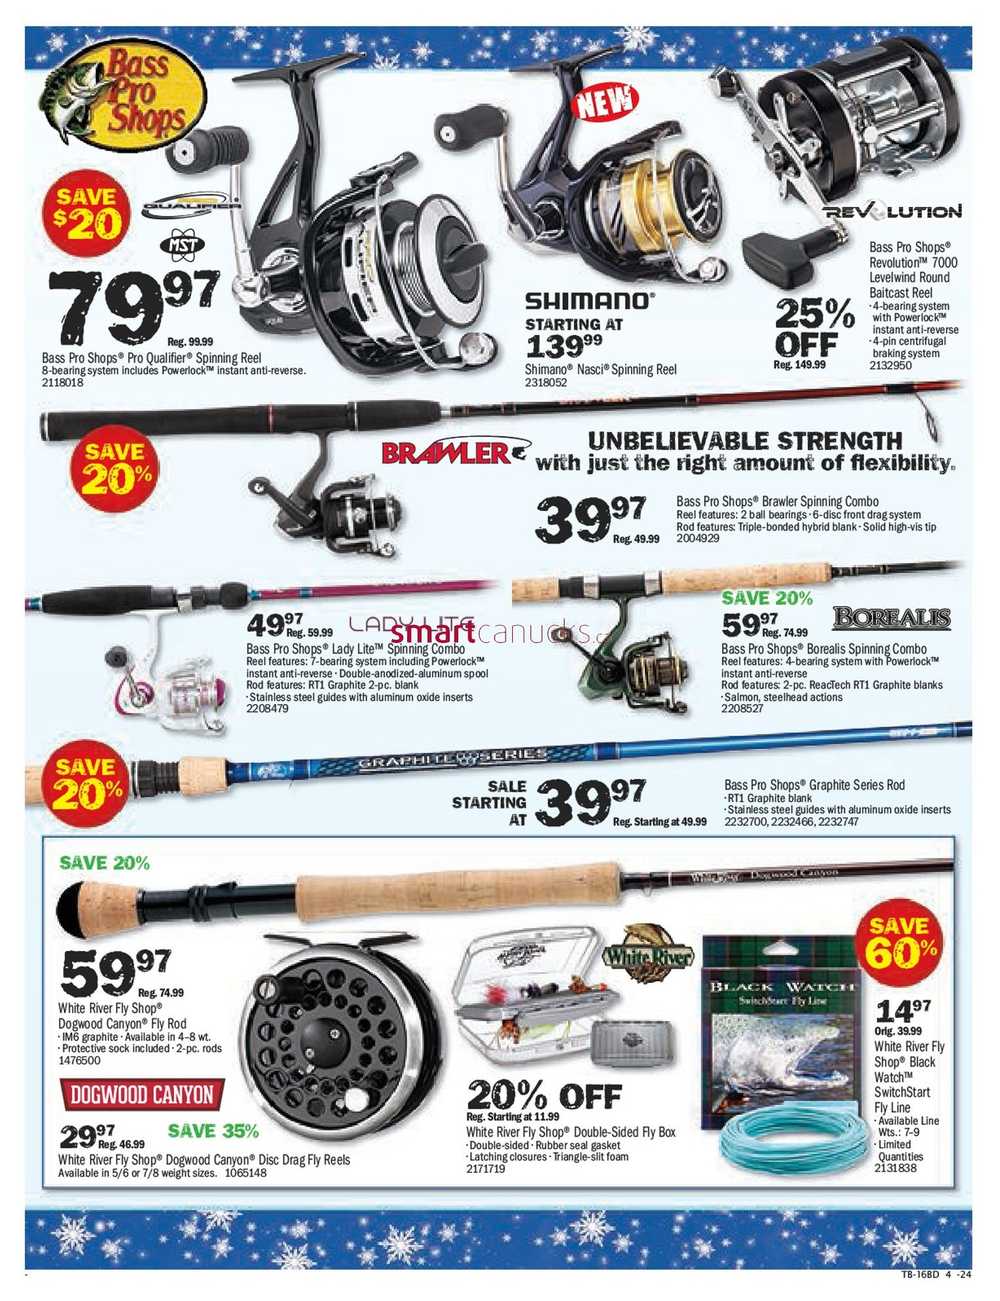 Bass Pro Shops Boxing Week Sale & Clearance Flyer December 26 to January 1